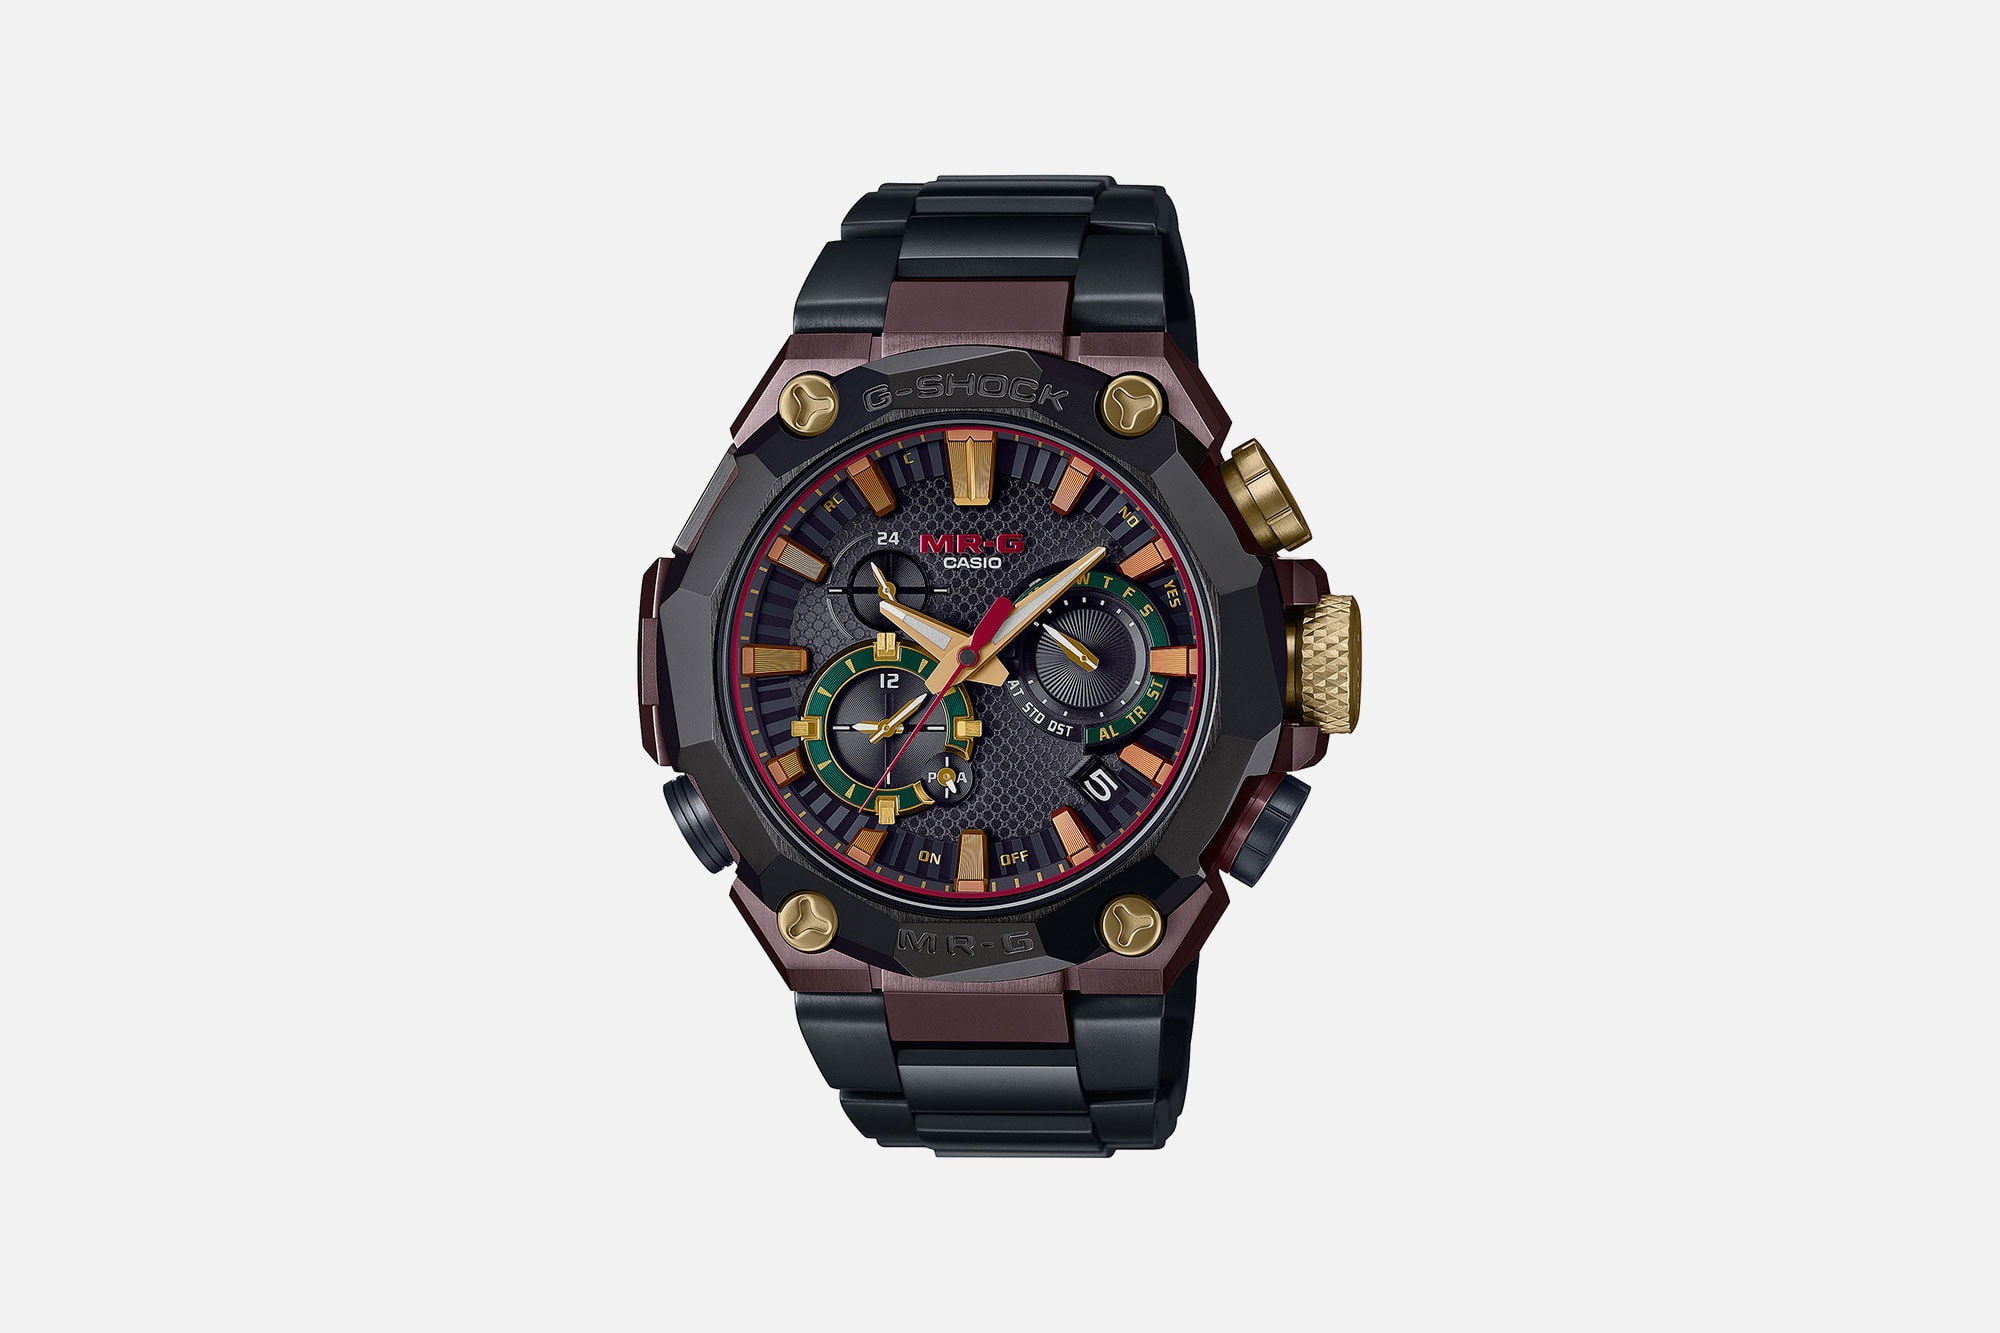 The Newest Watch in G-Shock’s MR-G Series is Inspired by Samurai Armor and Celebrates an Important Anniversary